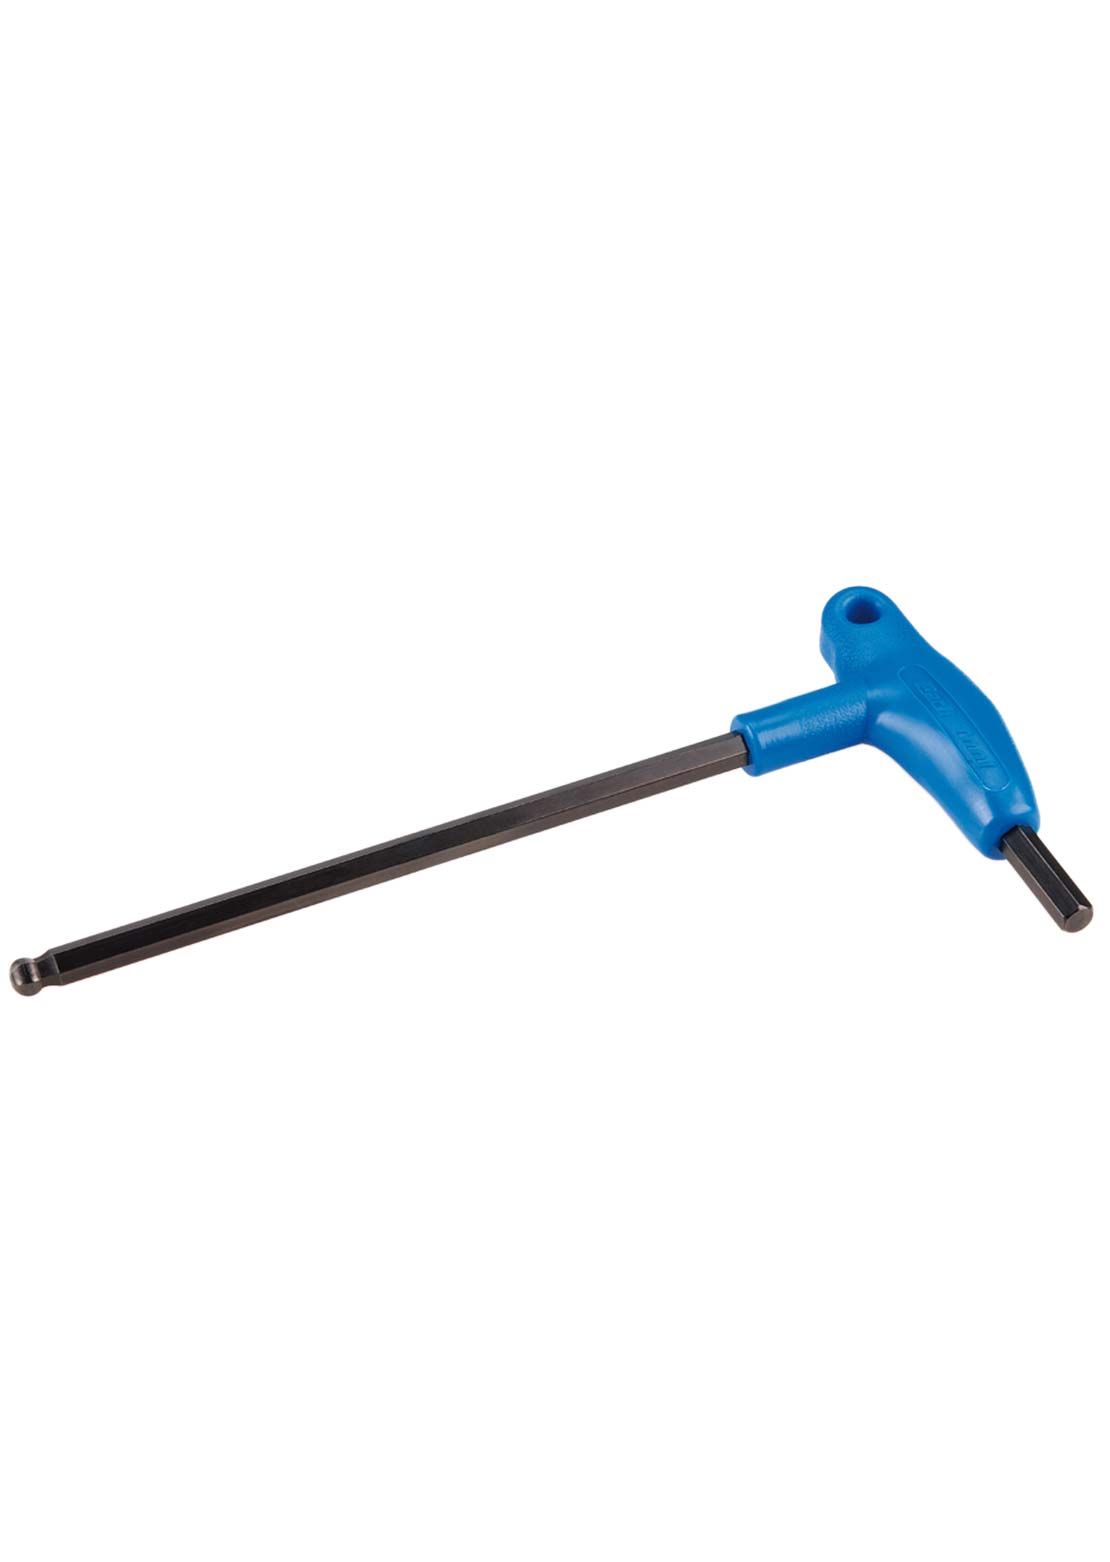 Park Tool PH-10 Hex Wrench with Molded Grip